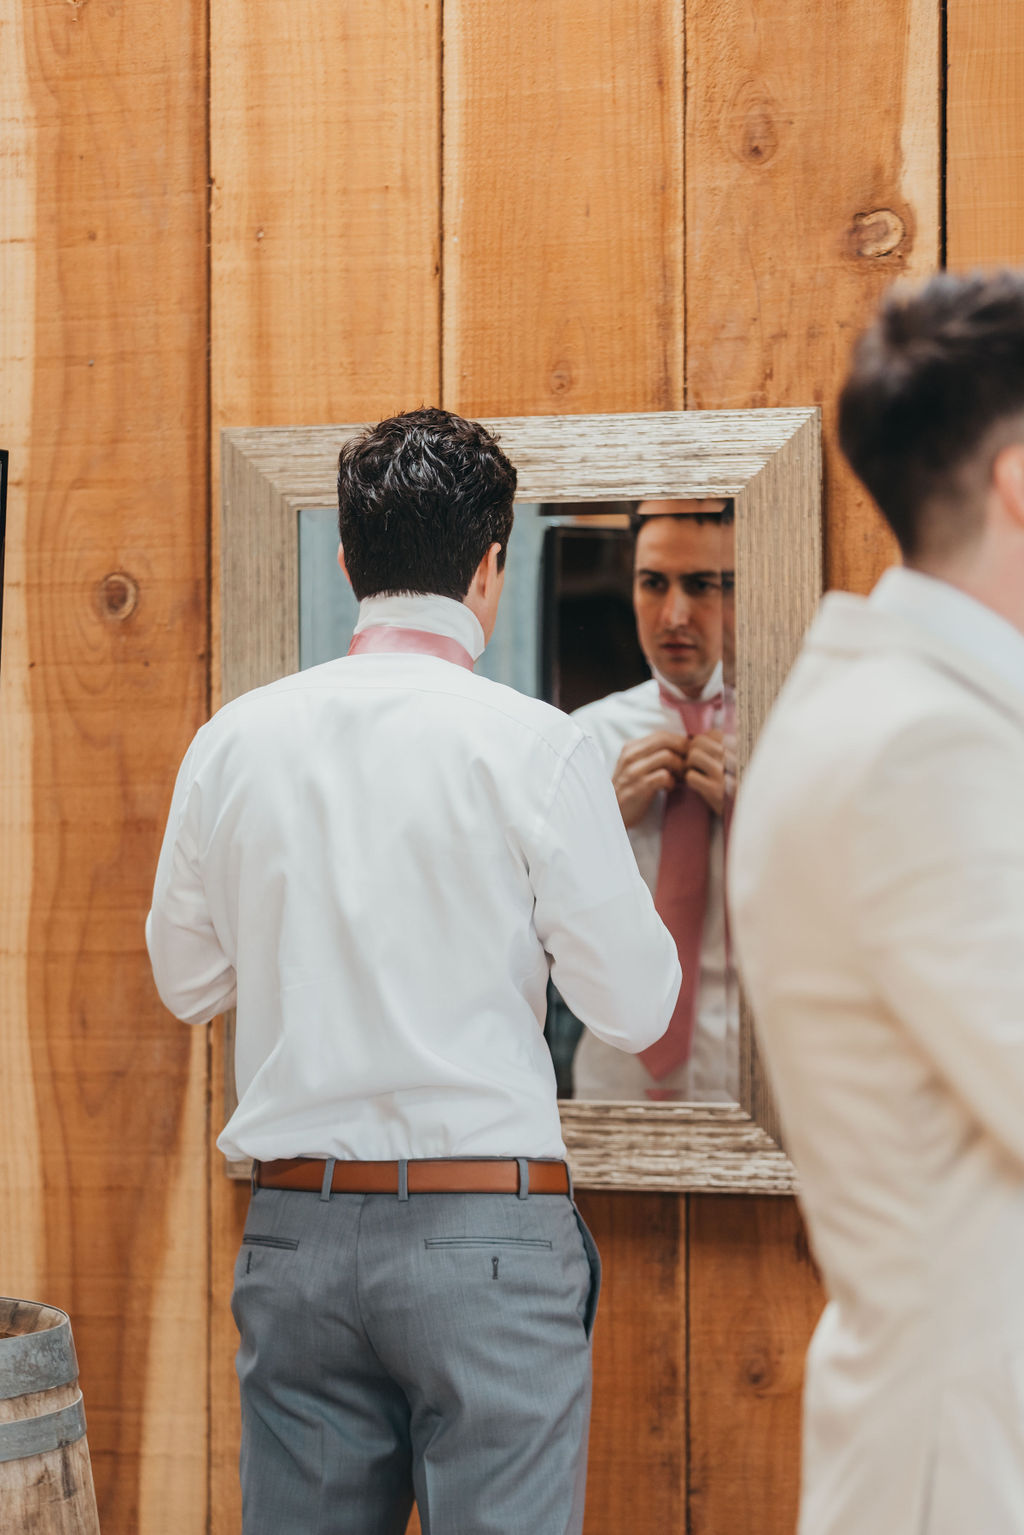 Two men in formal attire stand in front of a mirror. One adjusts his necktie while the other looks at his reflection. They are in a wooden-paneled room.